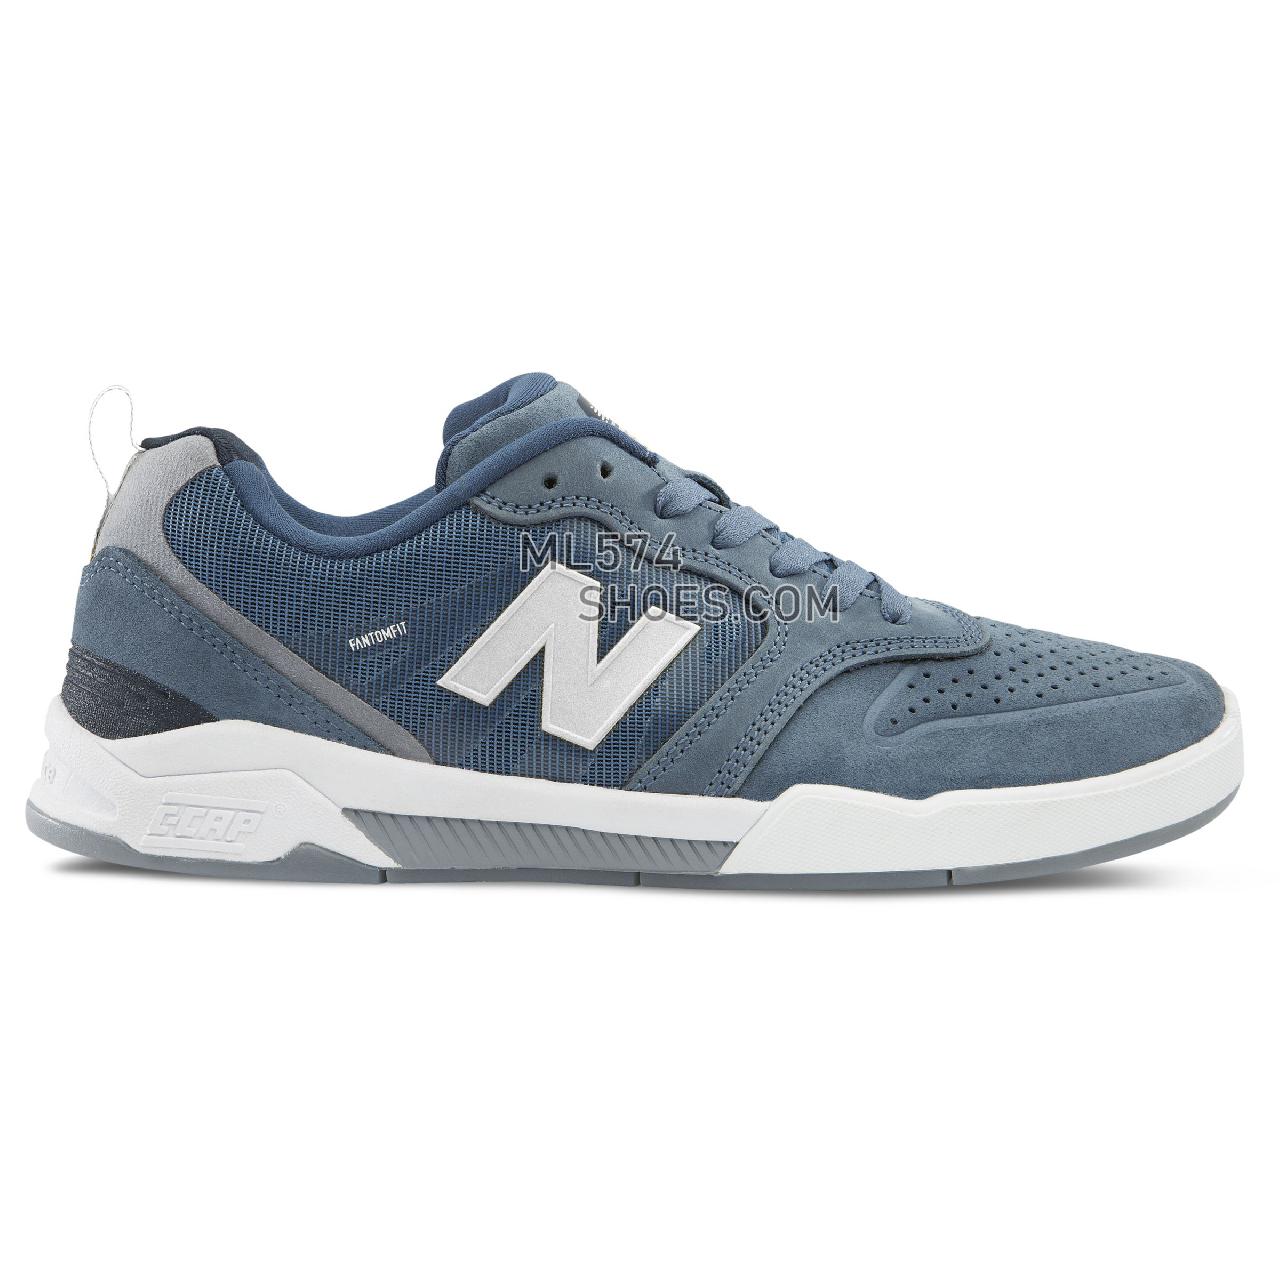 New Balance 868 - Men's 868 - Classic Blue with Grey - NM868GYB